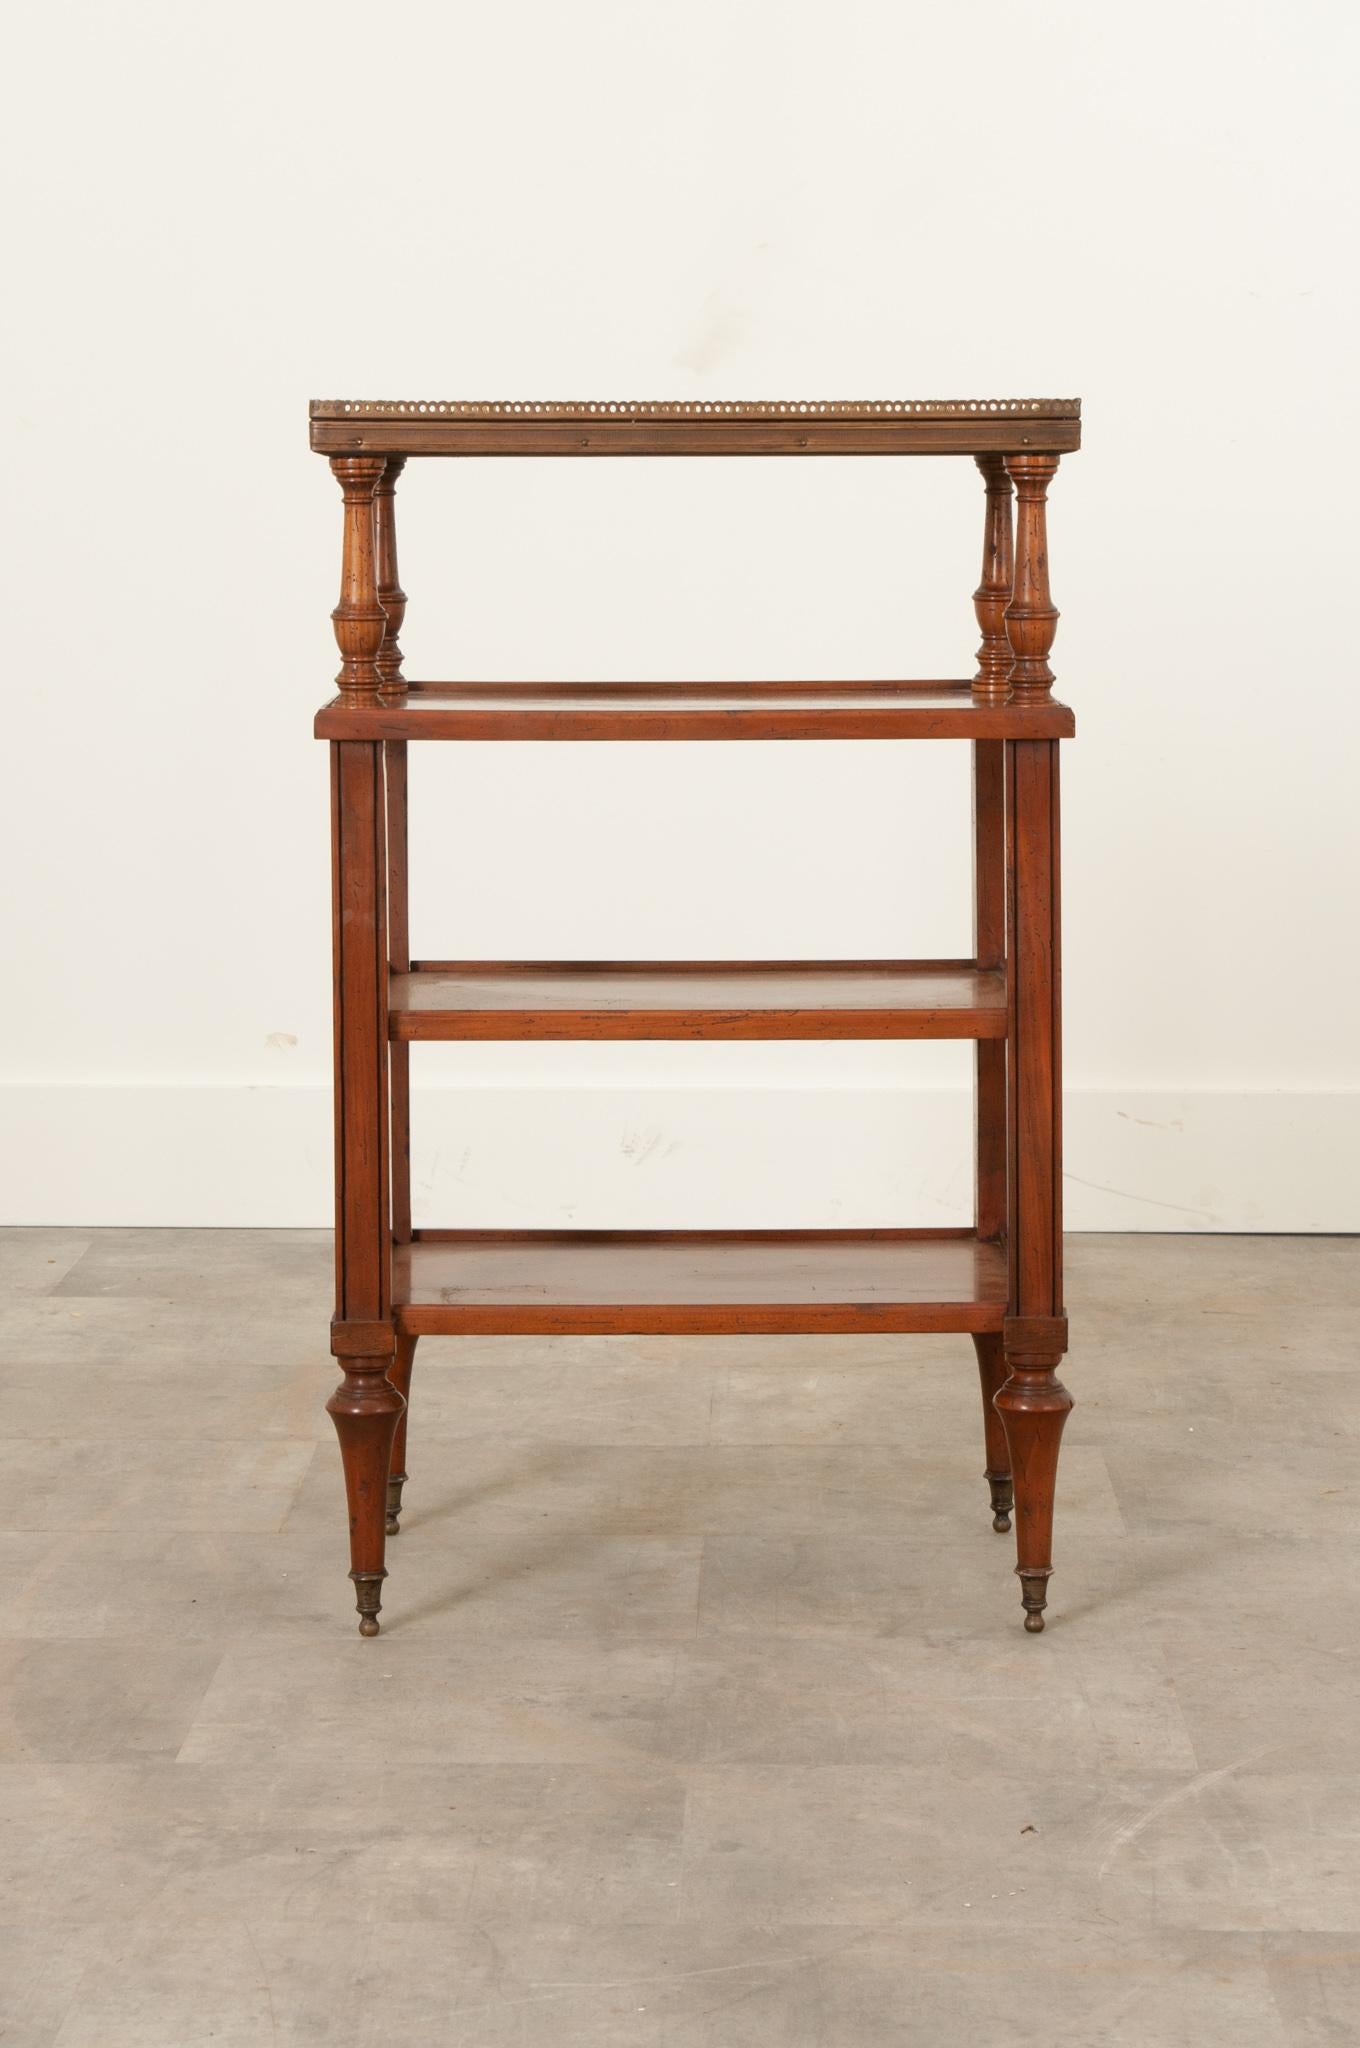 A fantastic fruitwood etagere from 19th century France. This tiered table has four total shelves, with the topmost being made of marble and surrounded by a pierced brass gallery. It is lifted by beautifully turned column-form supports. Beneath are